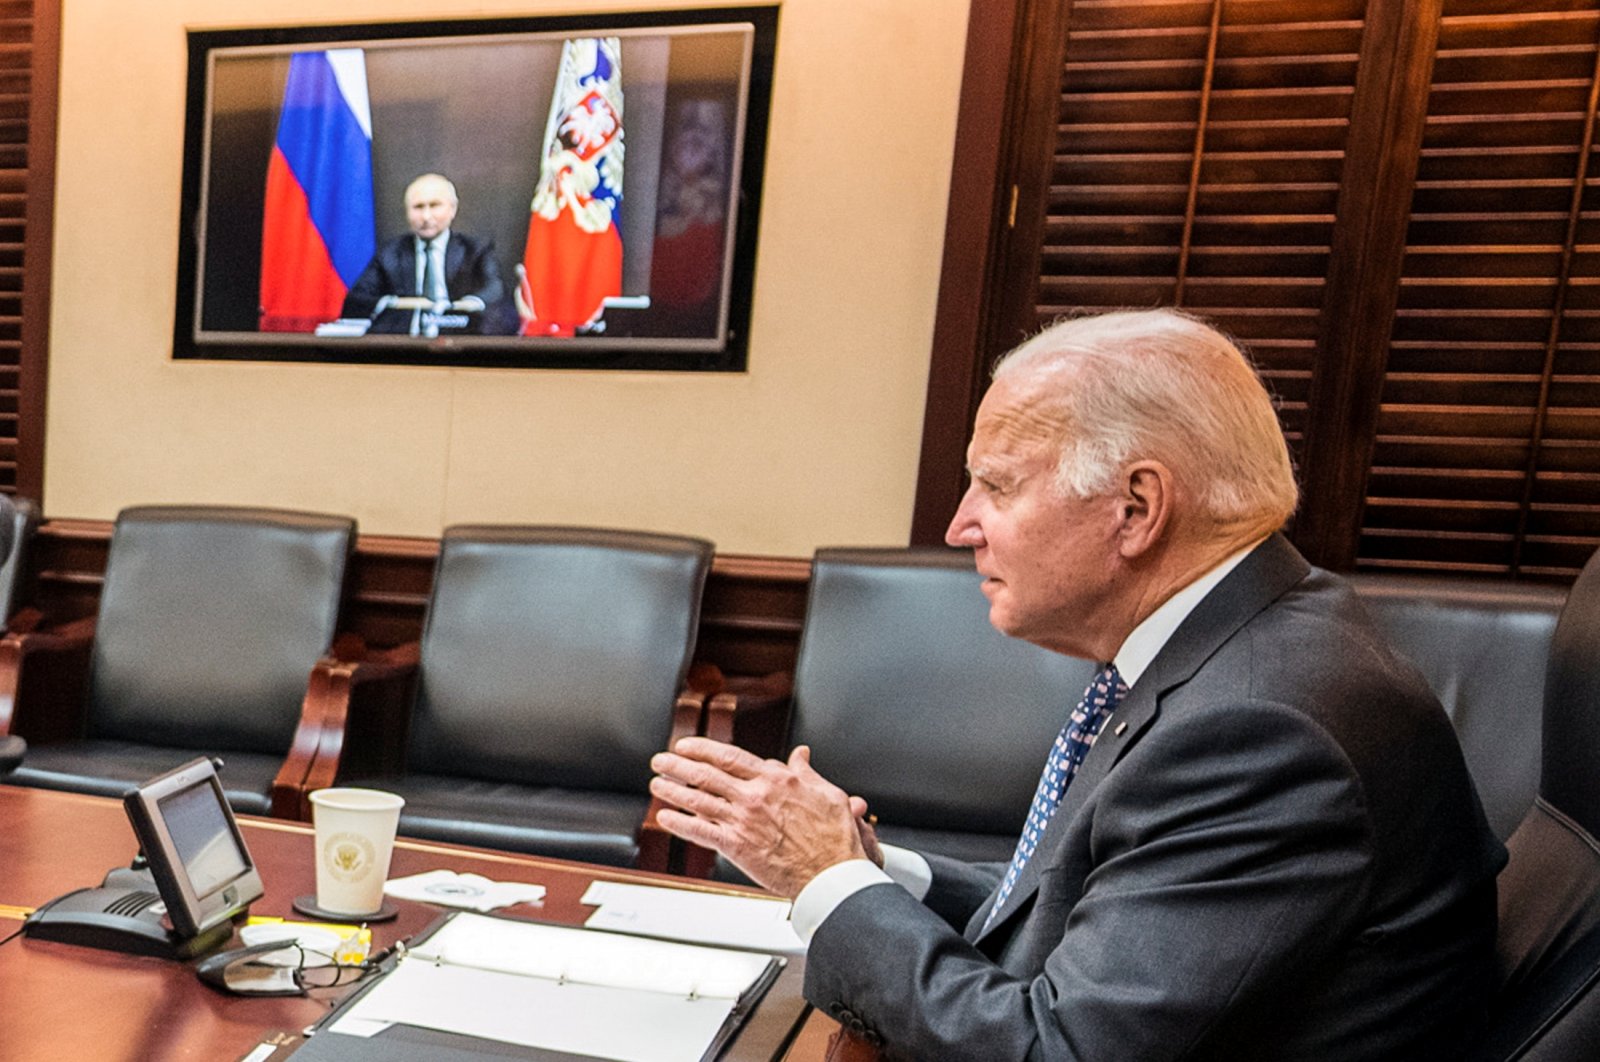 U.S. President Joe Biden holds virtual talks with Russia&#039;s President Vladimir Putin amid Western fears that Moscow plans to attack Ukraine, during a secure video call from the Situation Room at the White House in Washington, U.S., Dec. 7, 2021. (Reuters Photo)